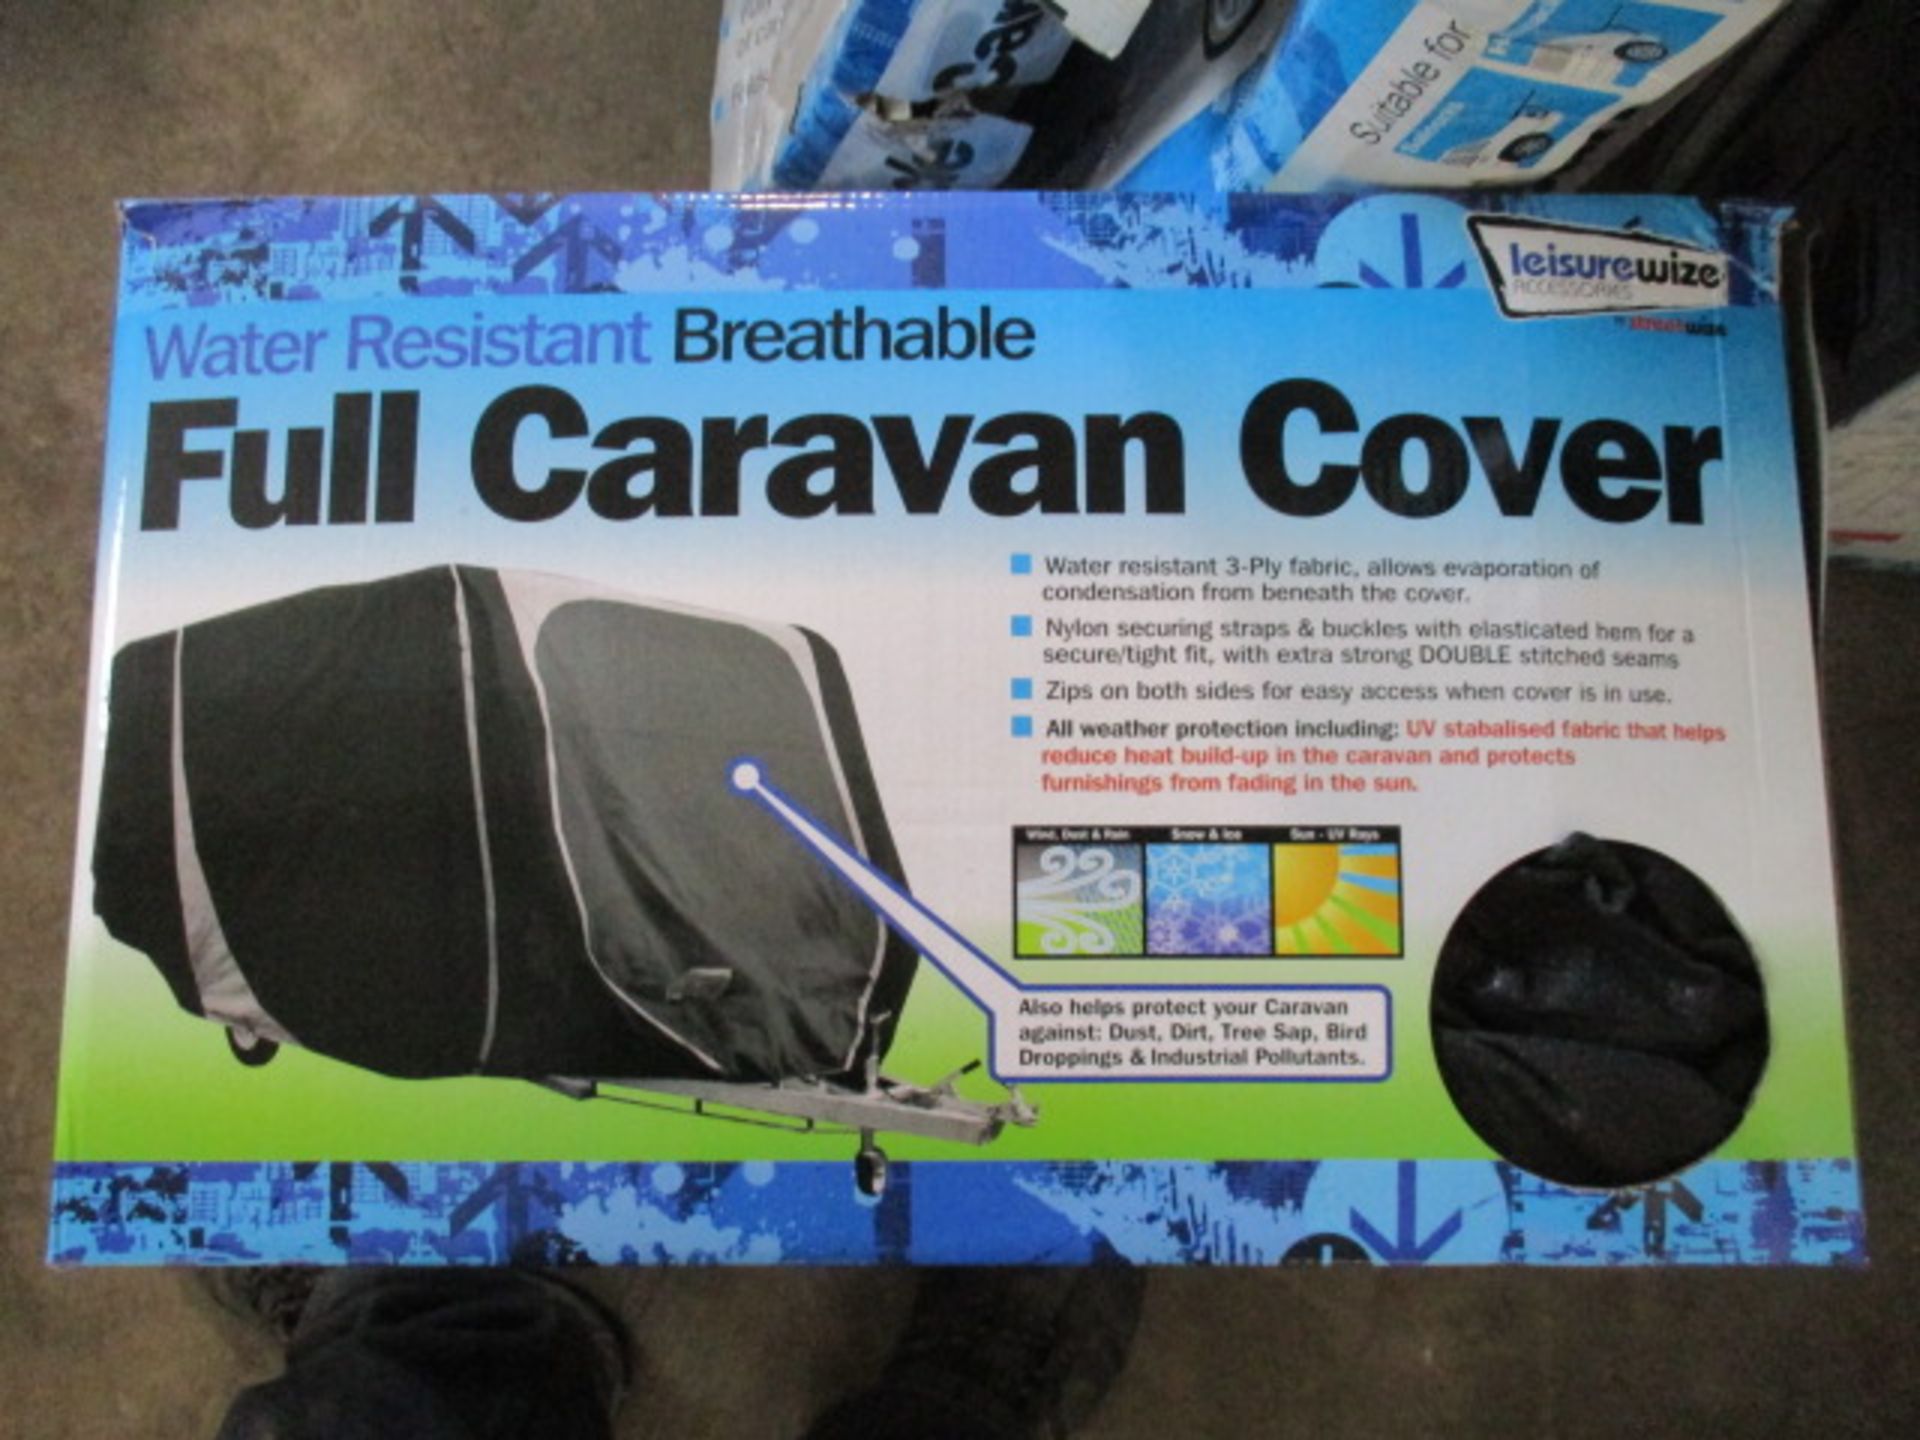 Large size caravan cover 17-19ft water resistant boxed rrp 119.99